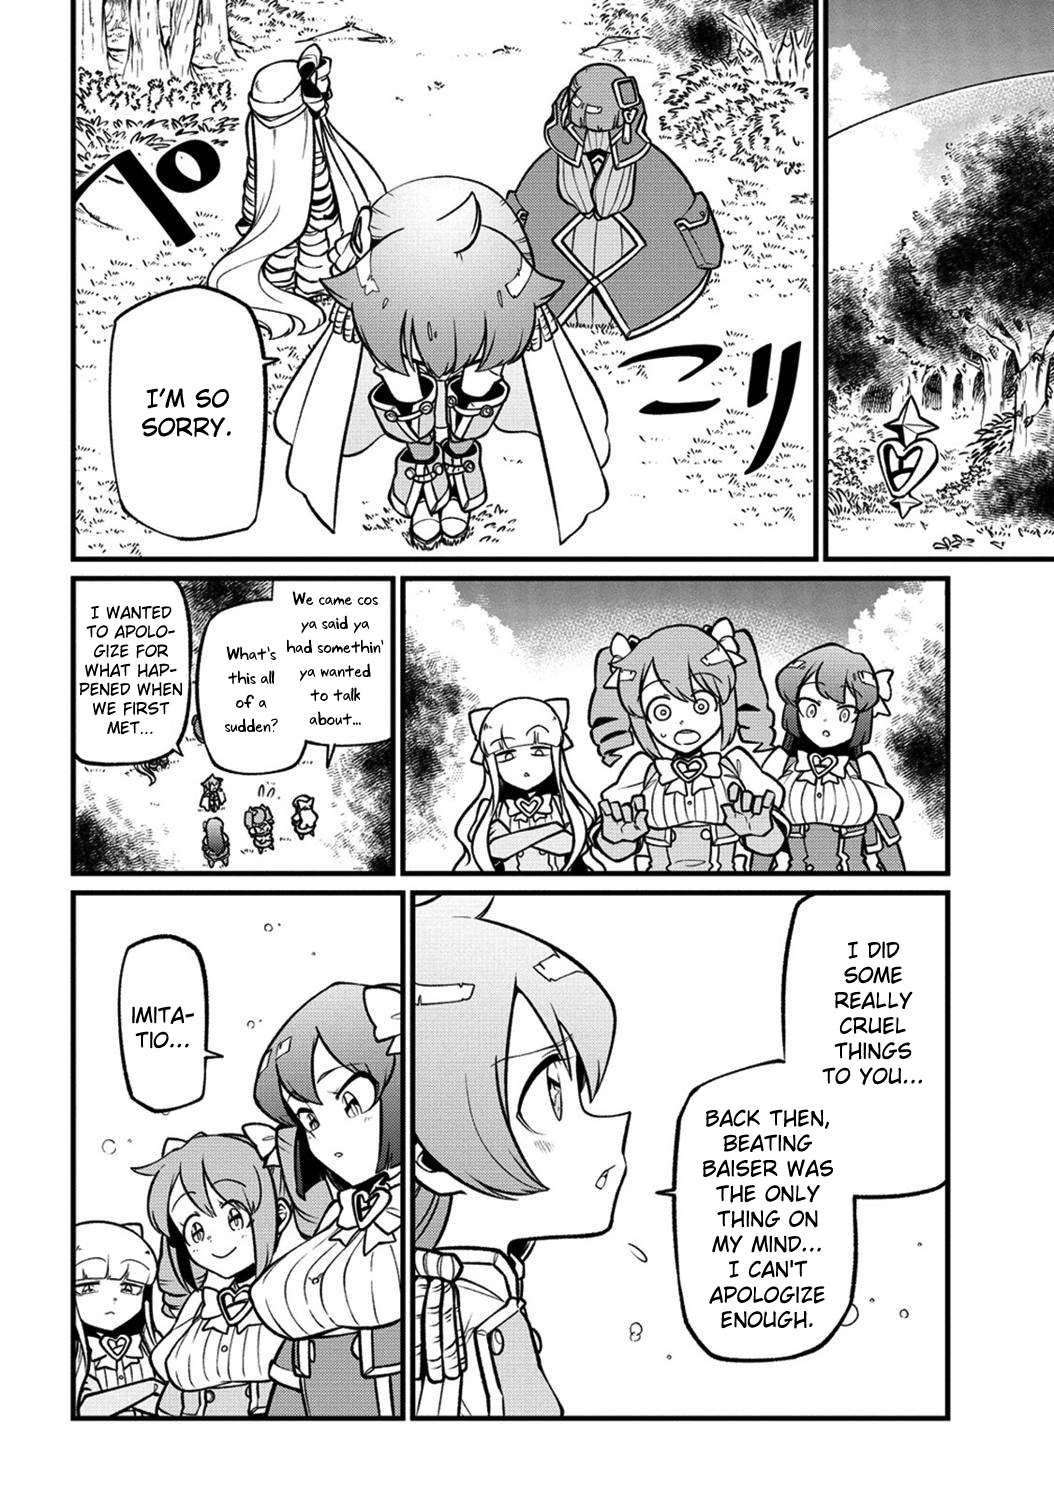 Gushing over Magical Girls - chapter 51 - #2